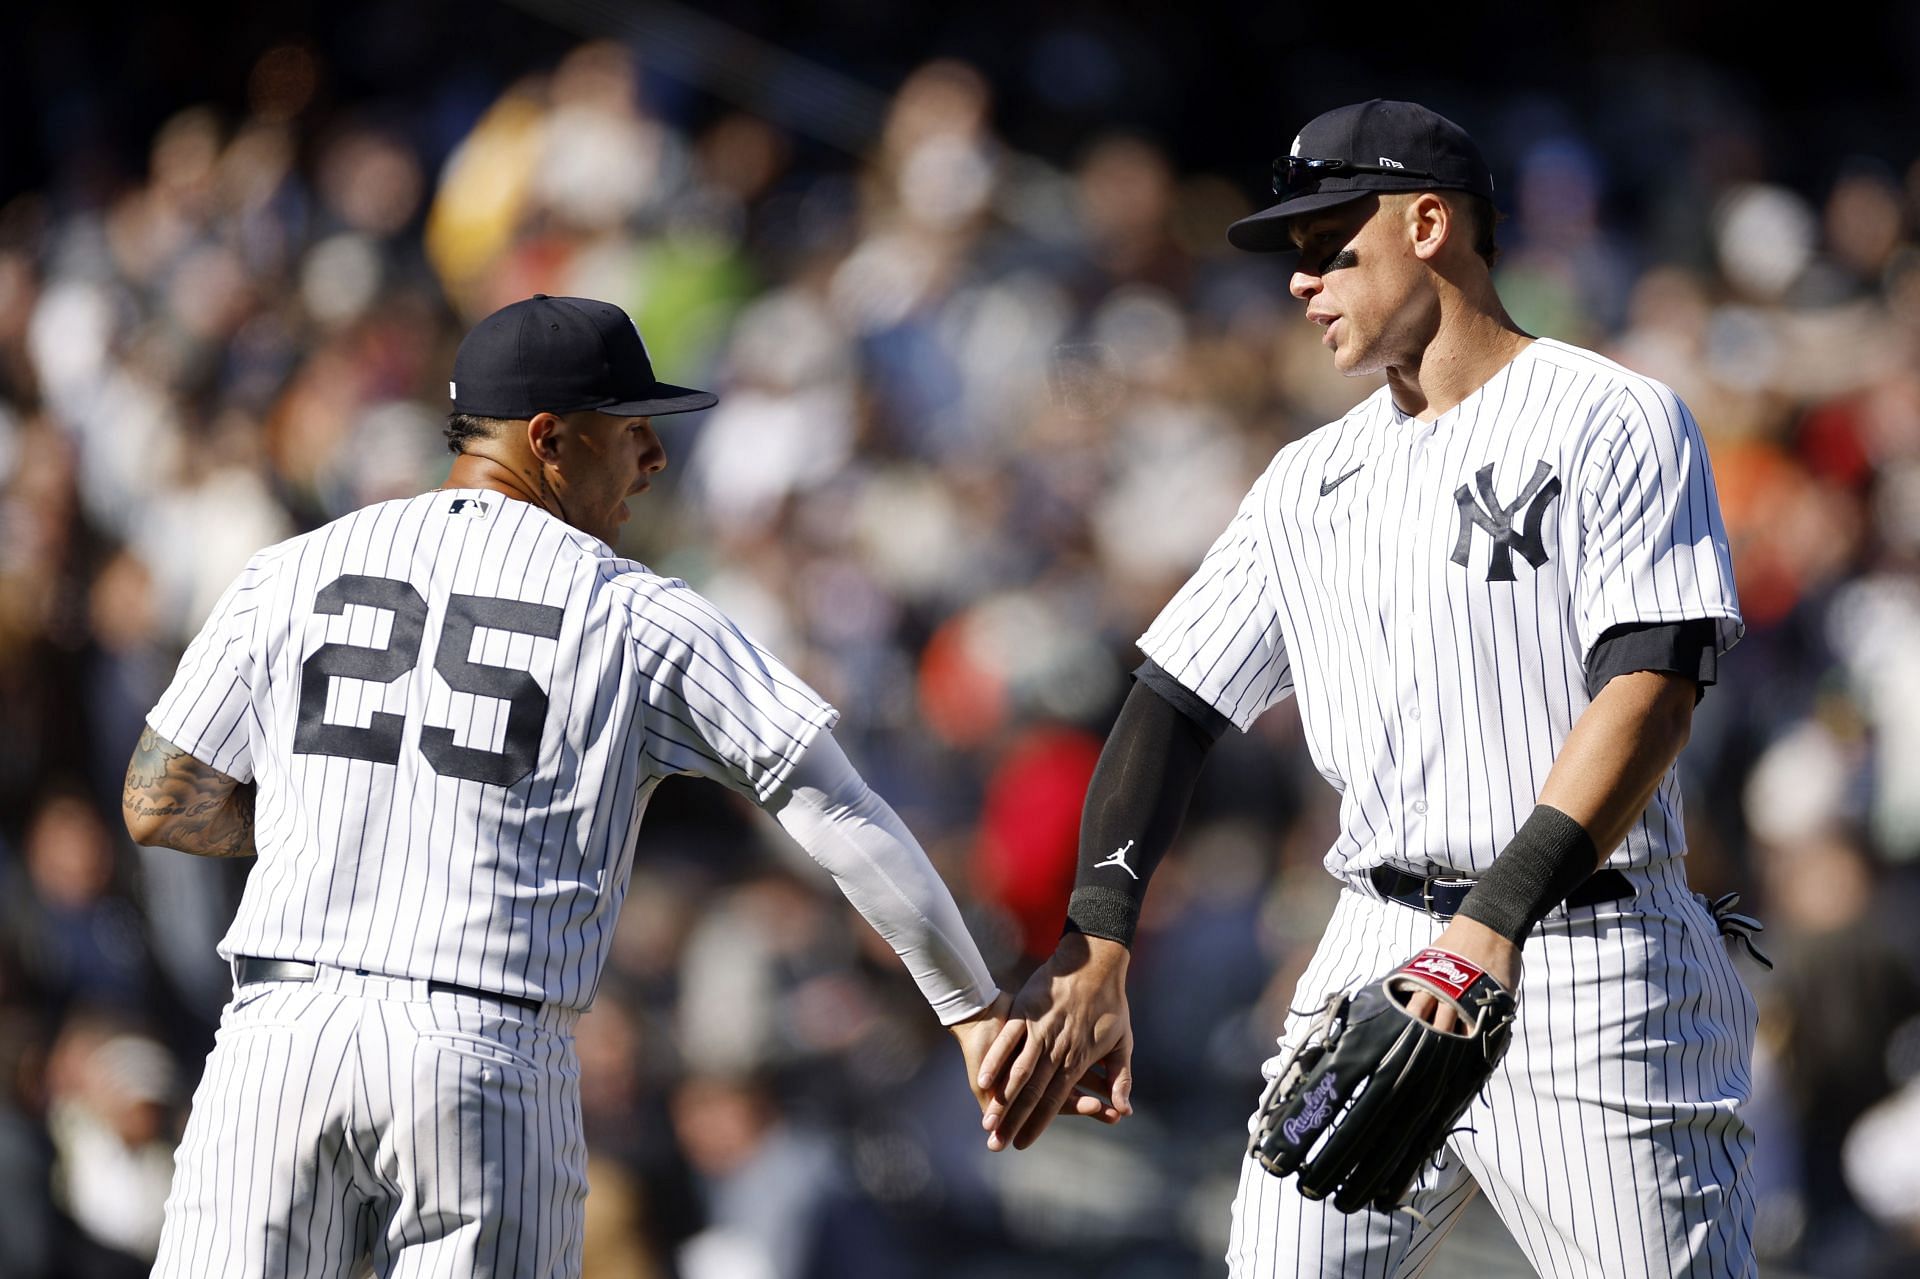 The Yankees may have a dodged a serious bullet with roster